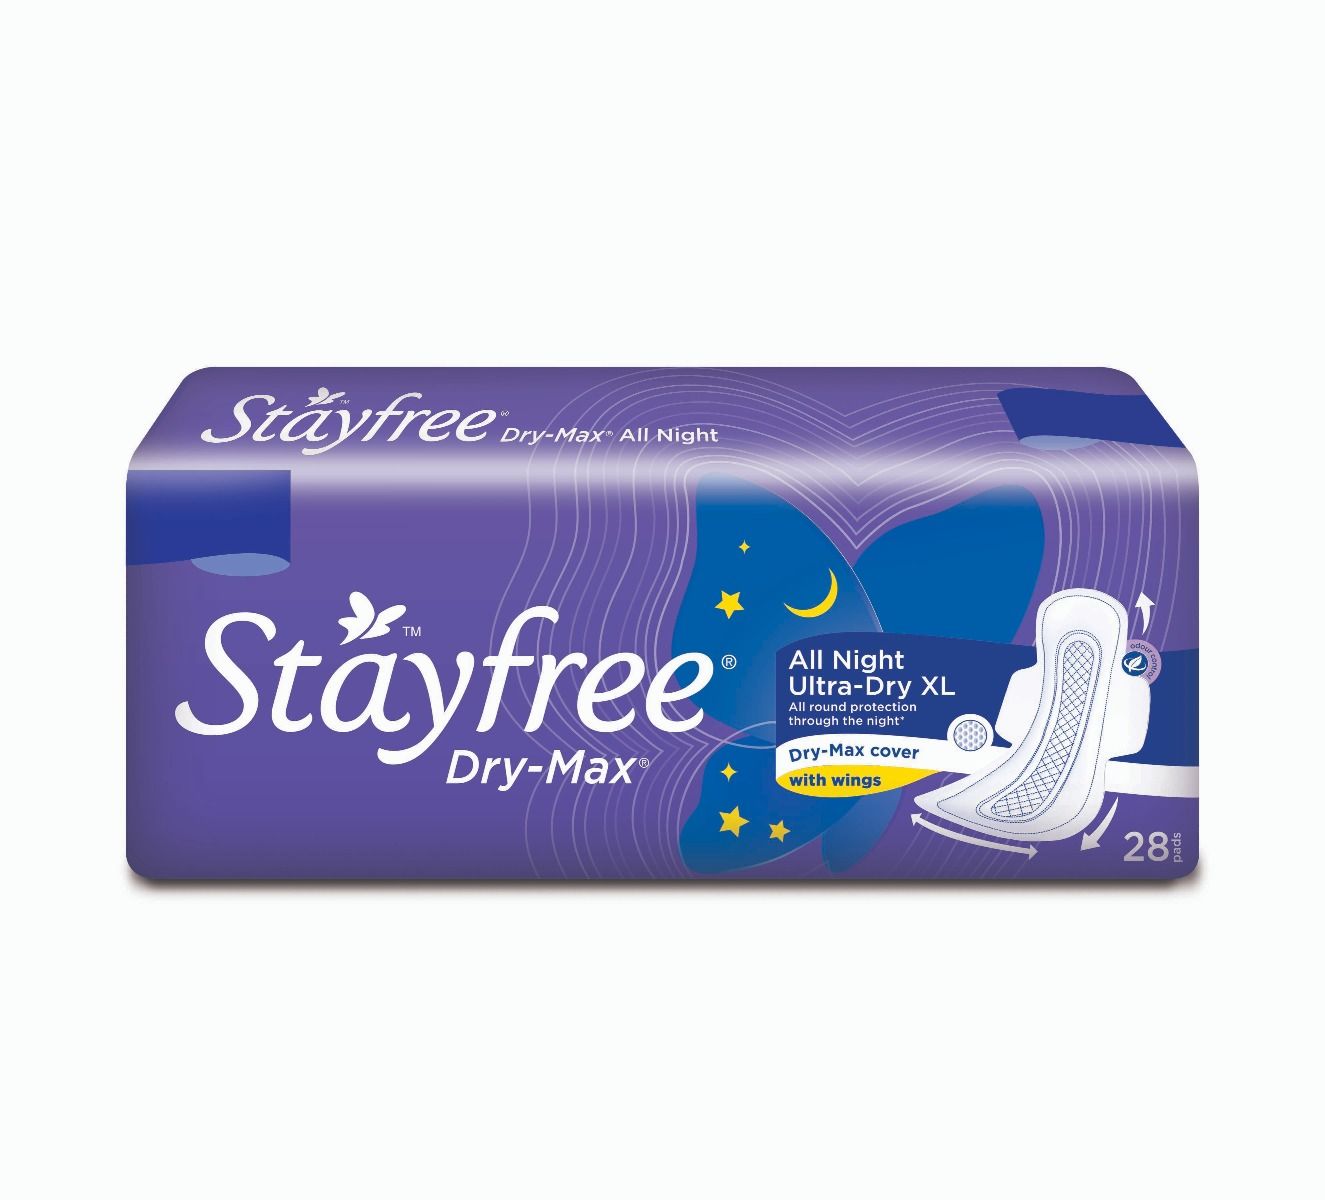 Stayfree Dry-Max All Night Ultra-Dry Pads With Wings XL, 28 Count, Pack of 1 